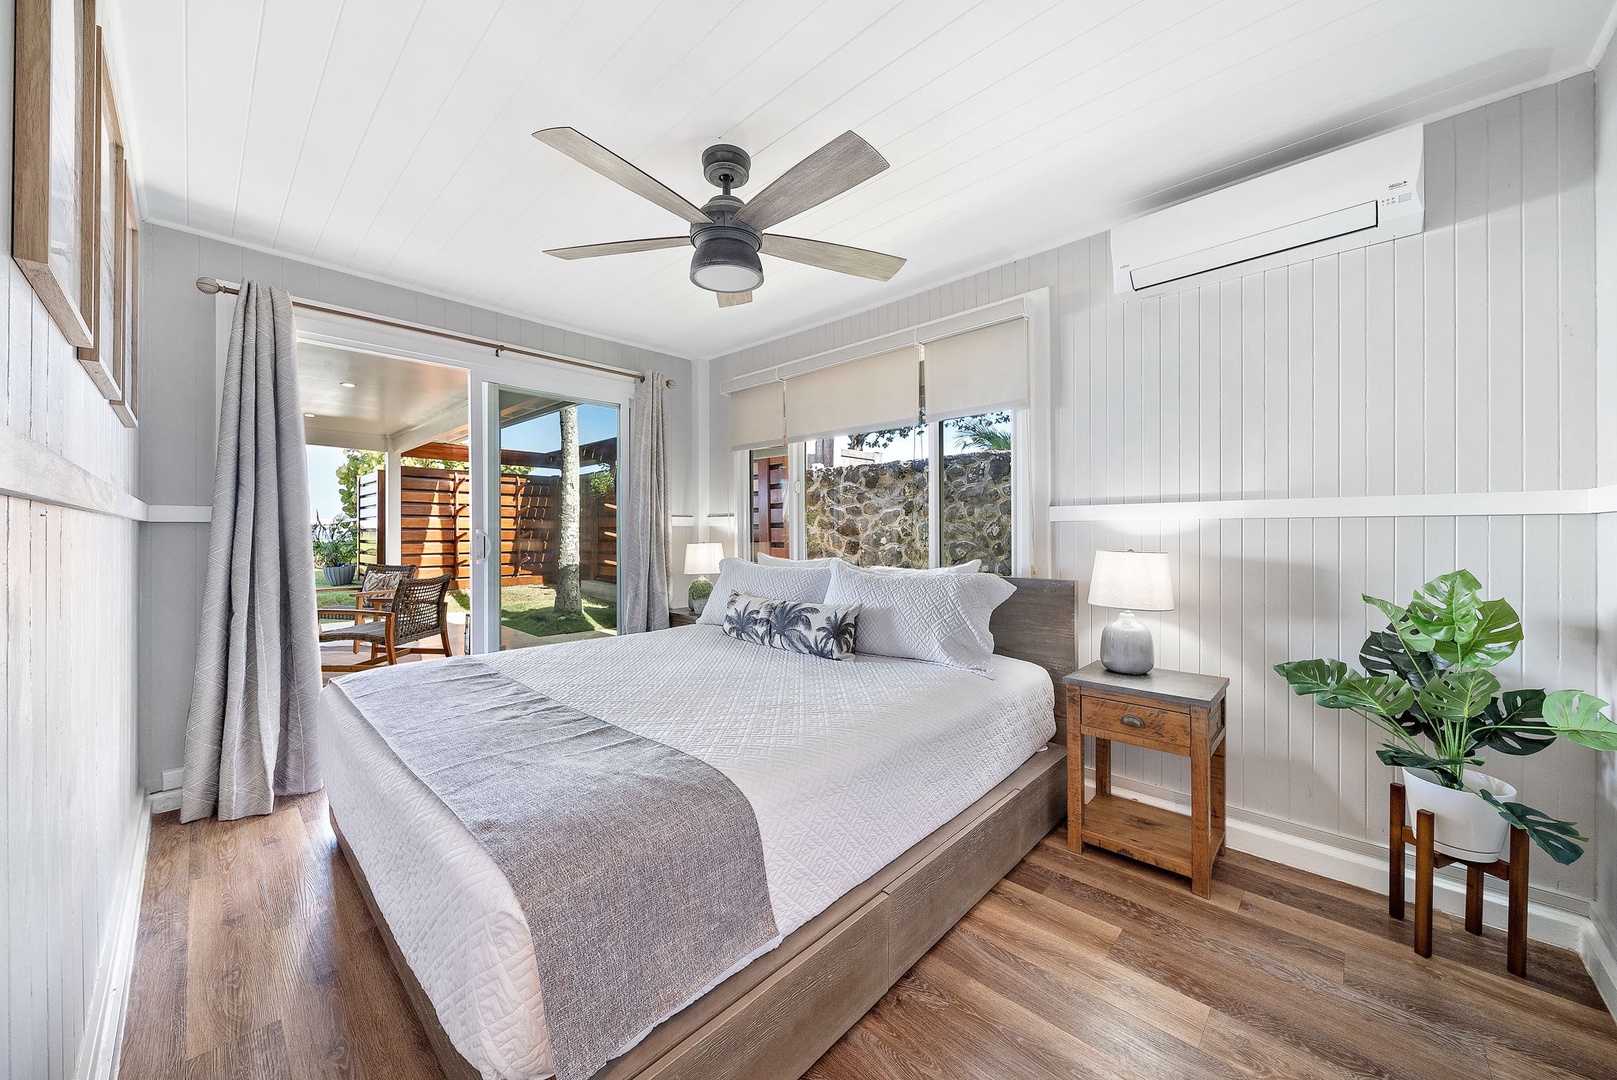 Haleiwa Vacation Rentals, Hale Nalu - Main Bedroom with ceiling fan and split A/C